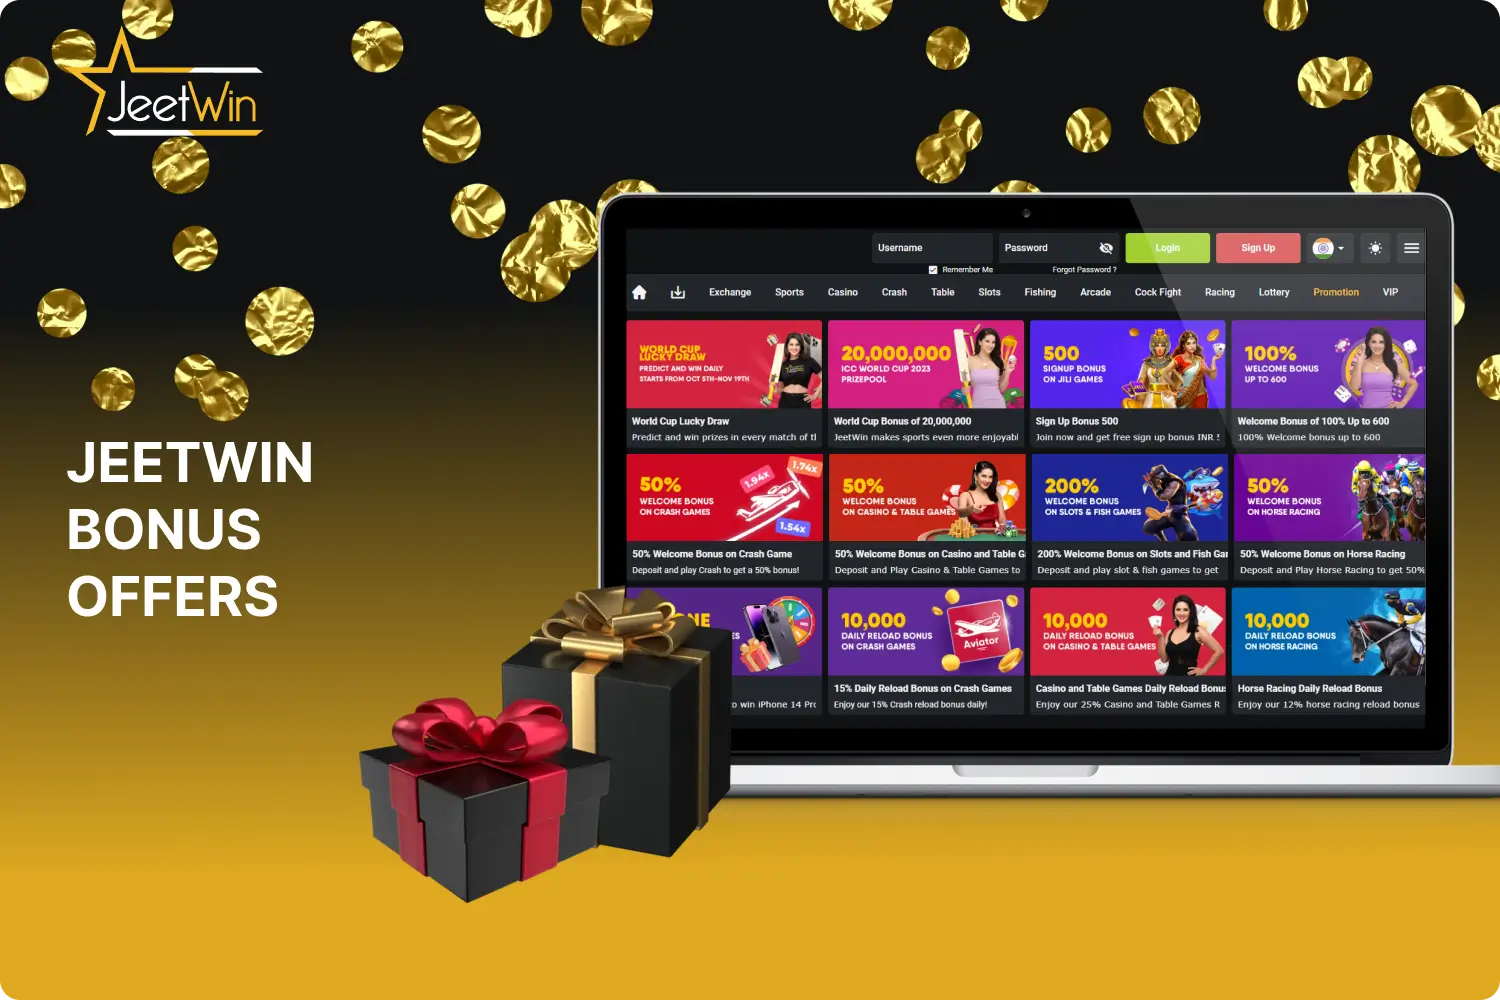 To enhance the gambling experience Jeetwin offers players various bonuses, both upon registration and for successful gaming